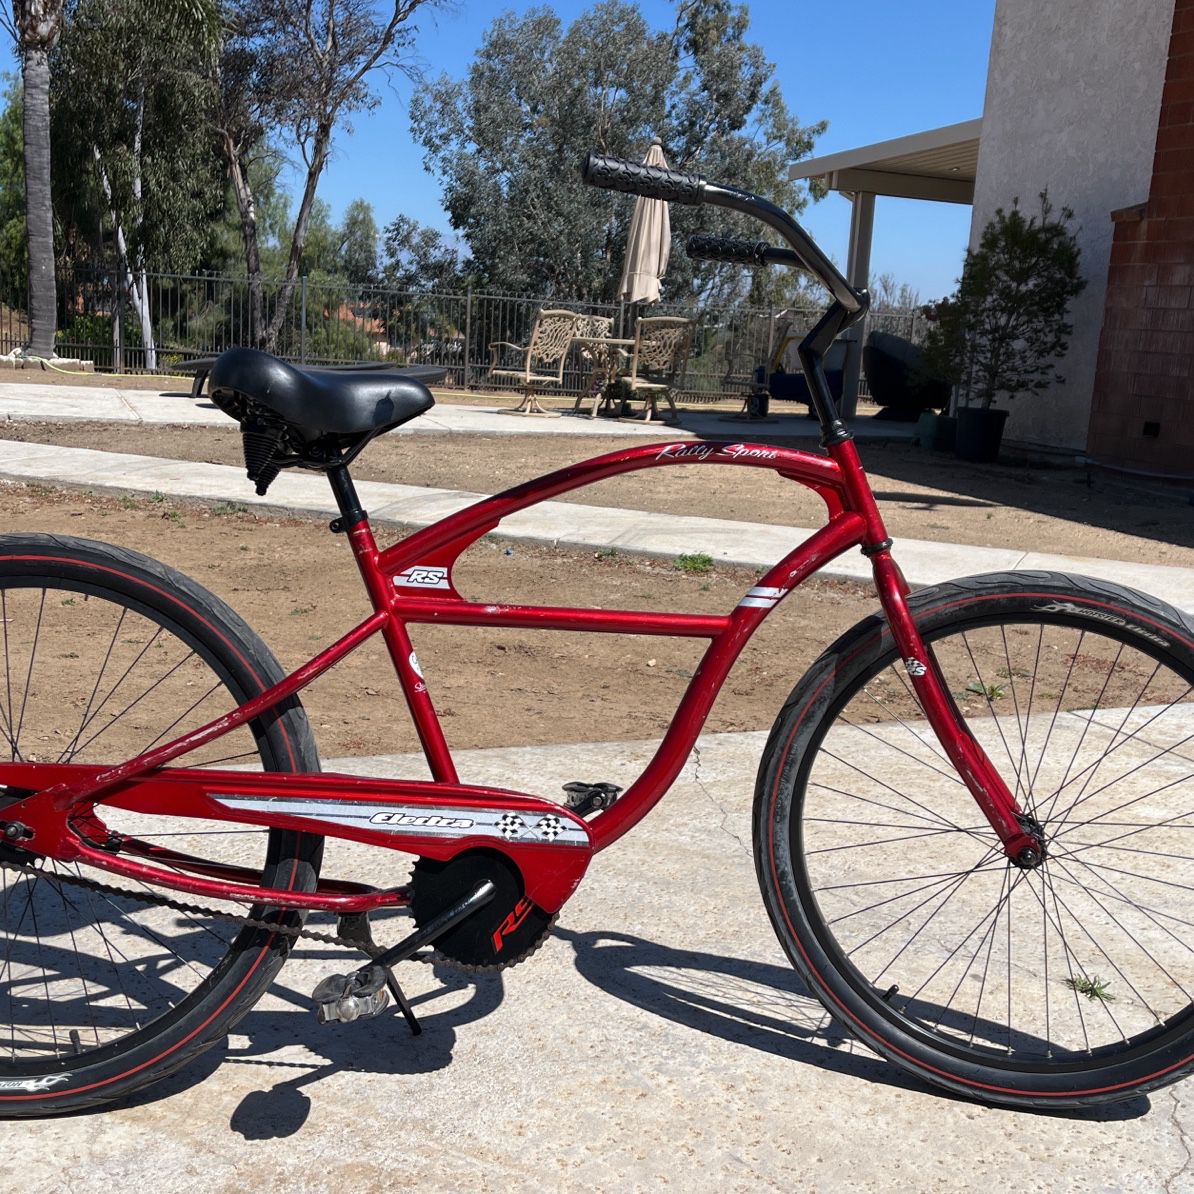 ELECTRA brand RALLY SPORT “RS”  edition single speed, coaster brake men’s beach cruiser 26 inch wheels and tires